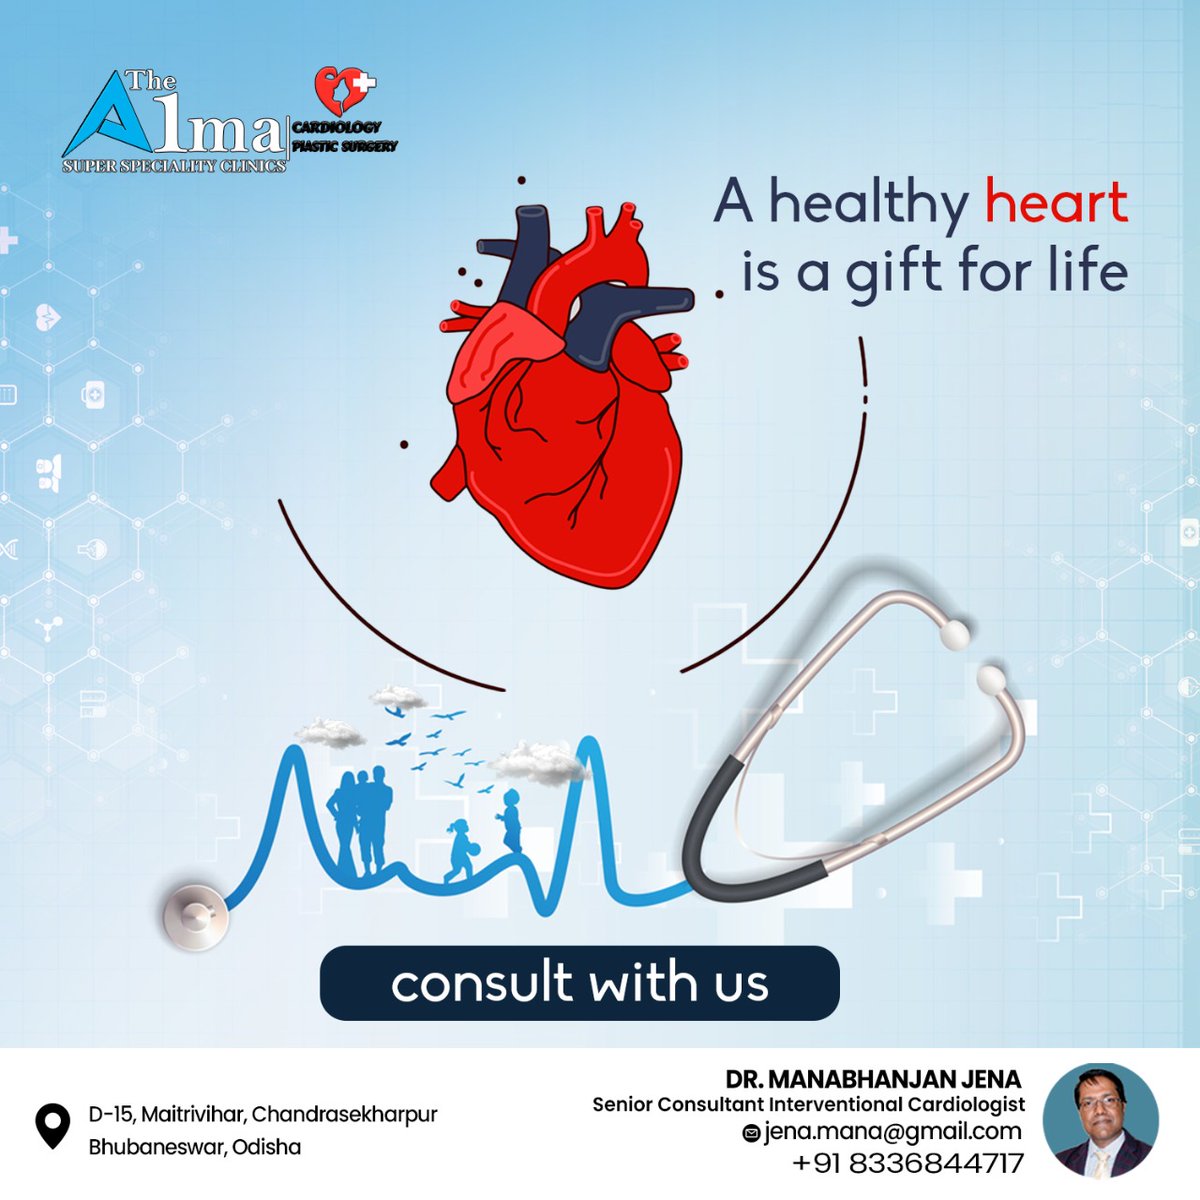 Your every heartbeat is valuable. Get in touch with our expert cardiologists at The Alma Super Speciality Clinics to ensure your heart’s healthy life. To book an appointment for a consultation, call 8336844717!!
#worldheartday #heart #hearthealth #heartday #health #healthyheart